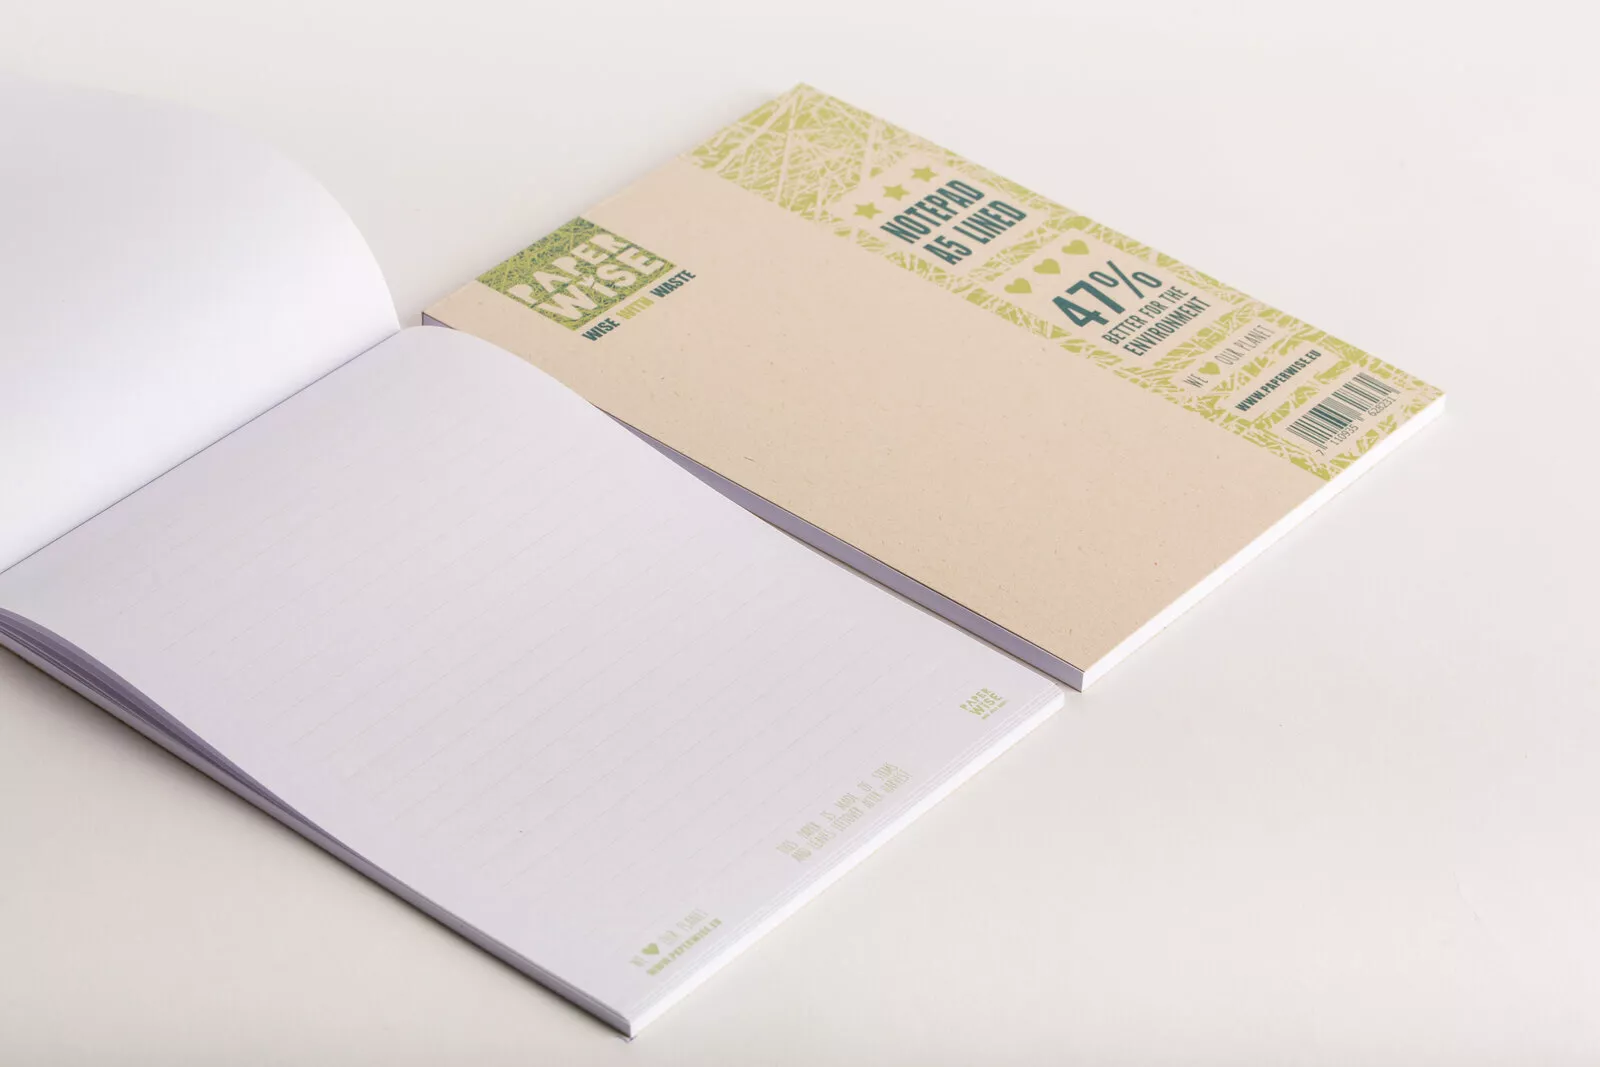 PaperWise sustainable paper notebooks A5 unbleached natural eco stationery organic writing pad office